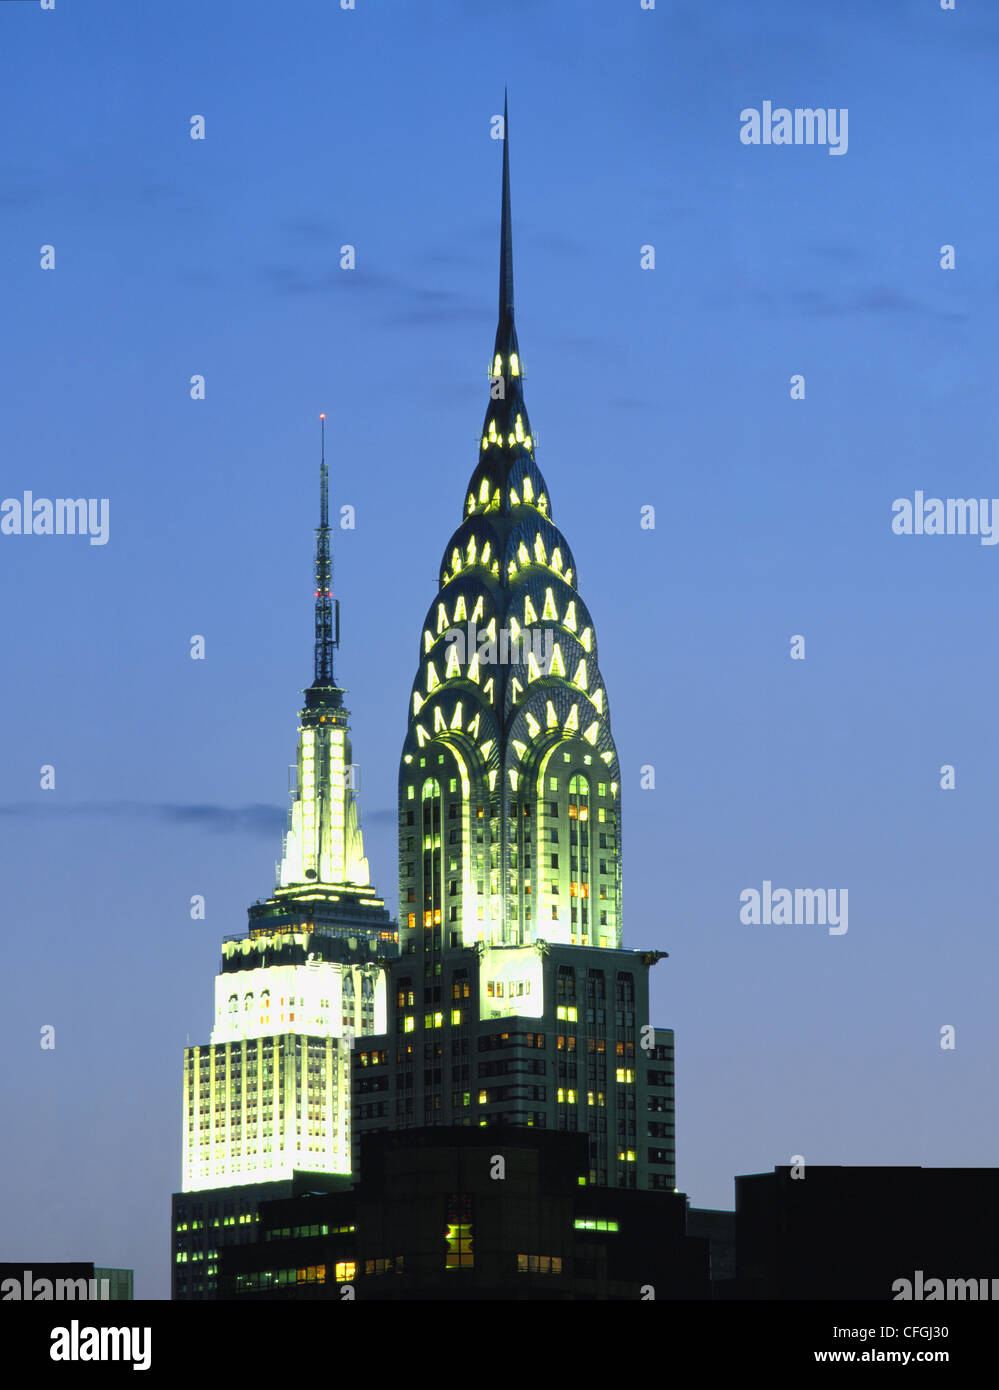 CHRYSLER AND EMPIRE STATE BUILDINGS AT NIGHT, NEW YORK, USA. Stock Photo